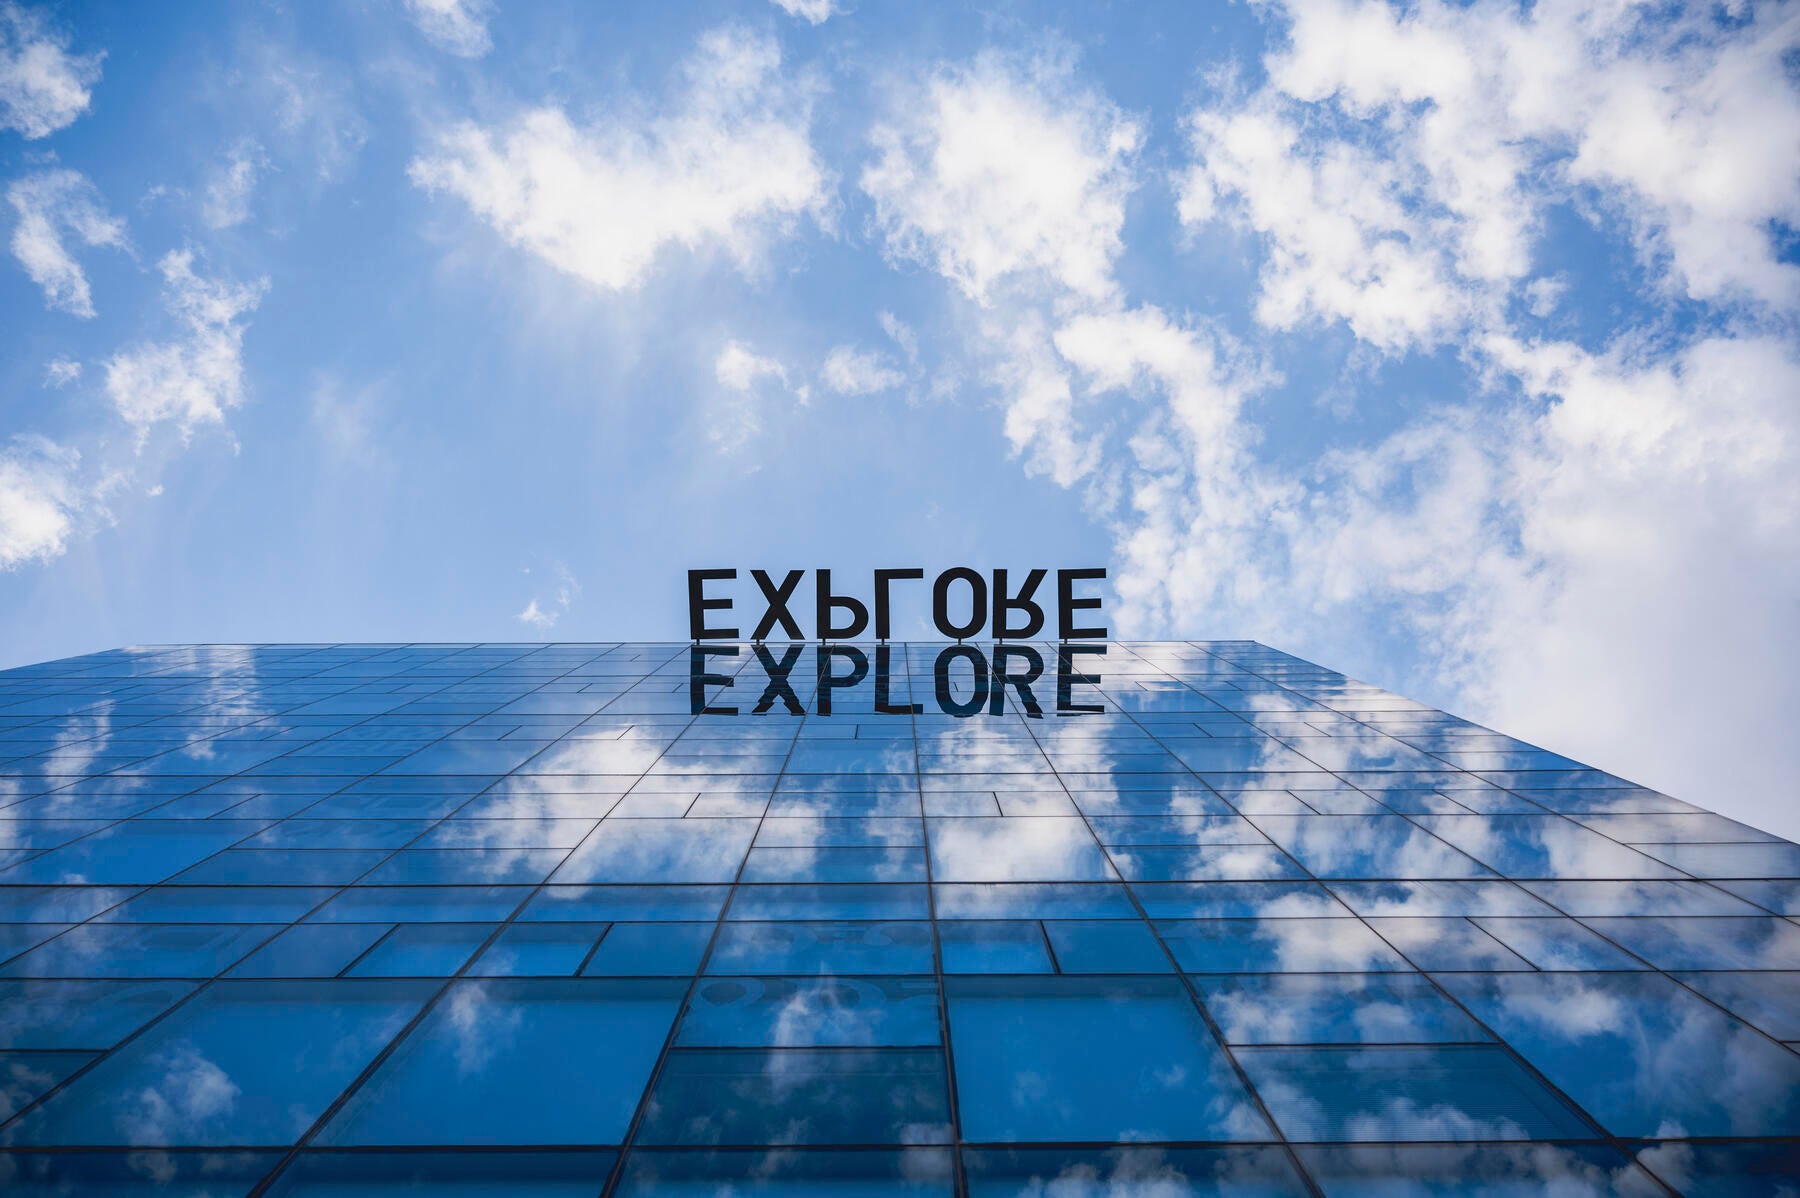 View of a building from the ground up with blue skies, white cloud and the word Explore written on the building reflection. 